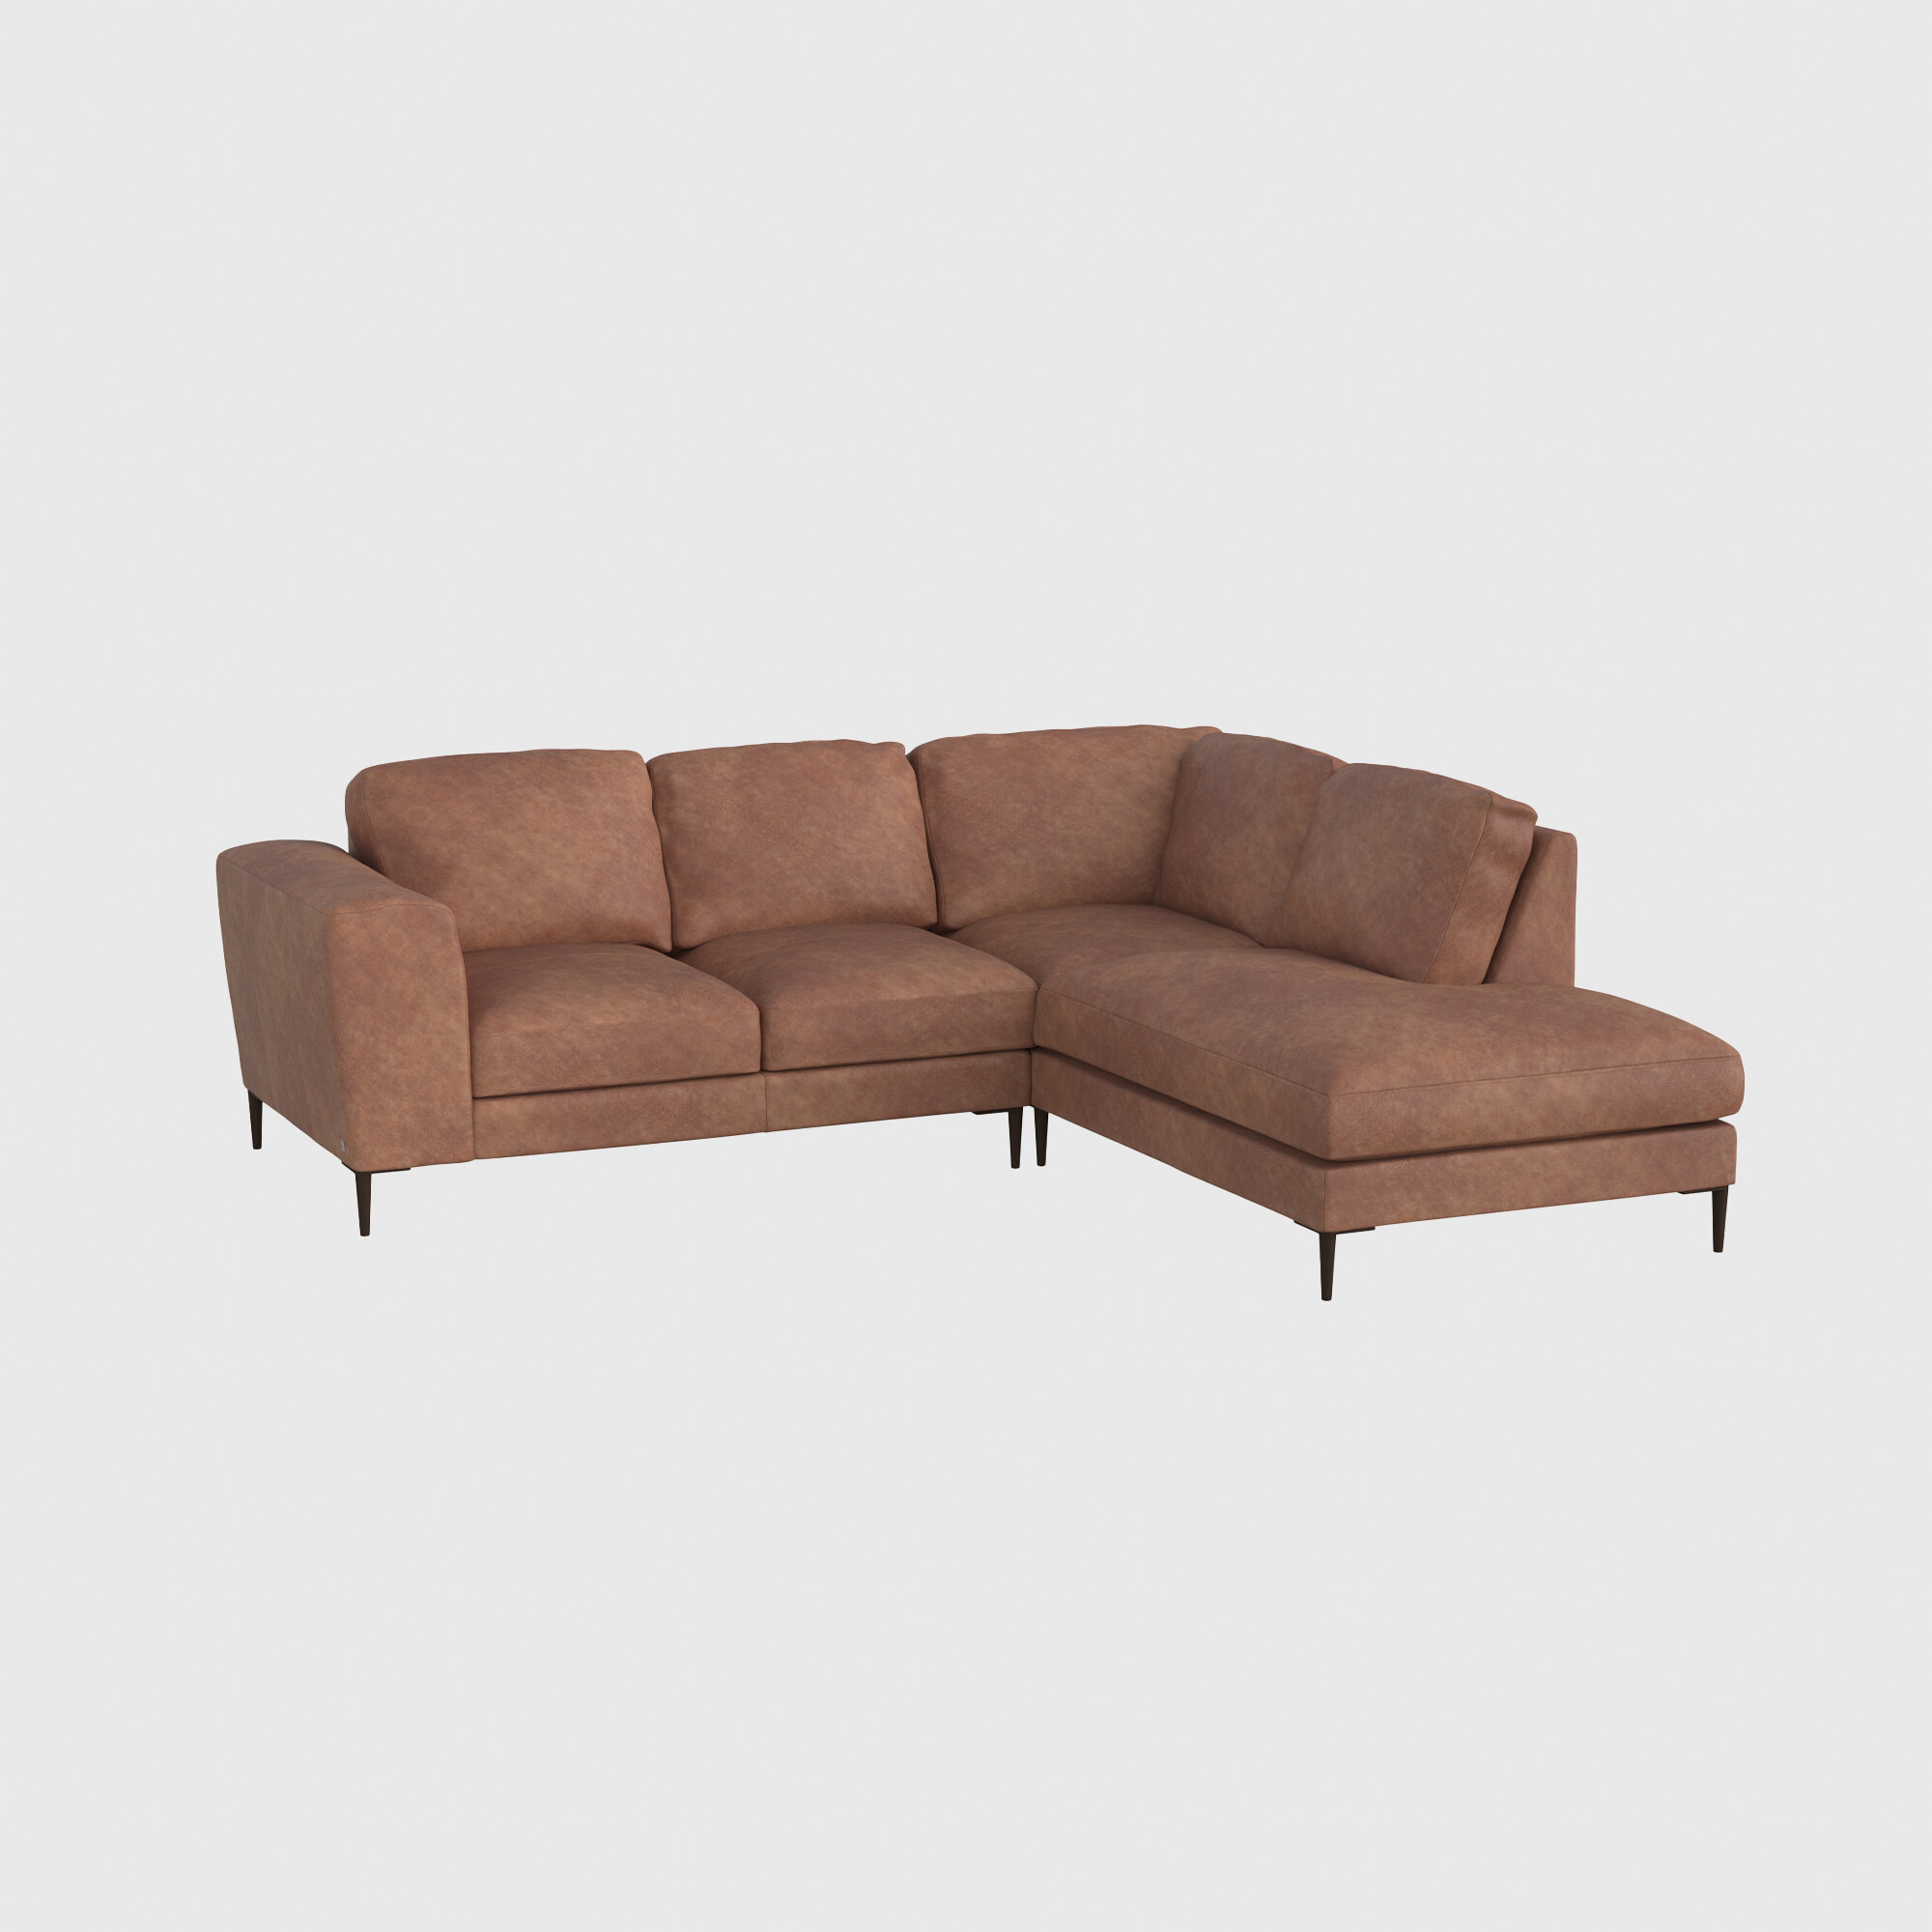 Troy Corner Sofa Chaise Right, Brown Leather | Barker & Stonehouse